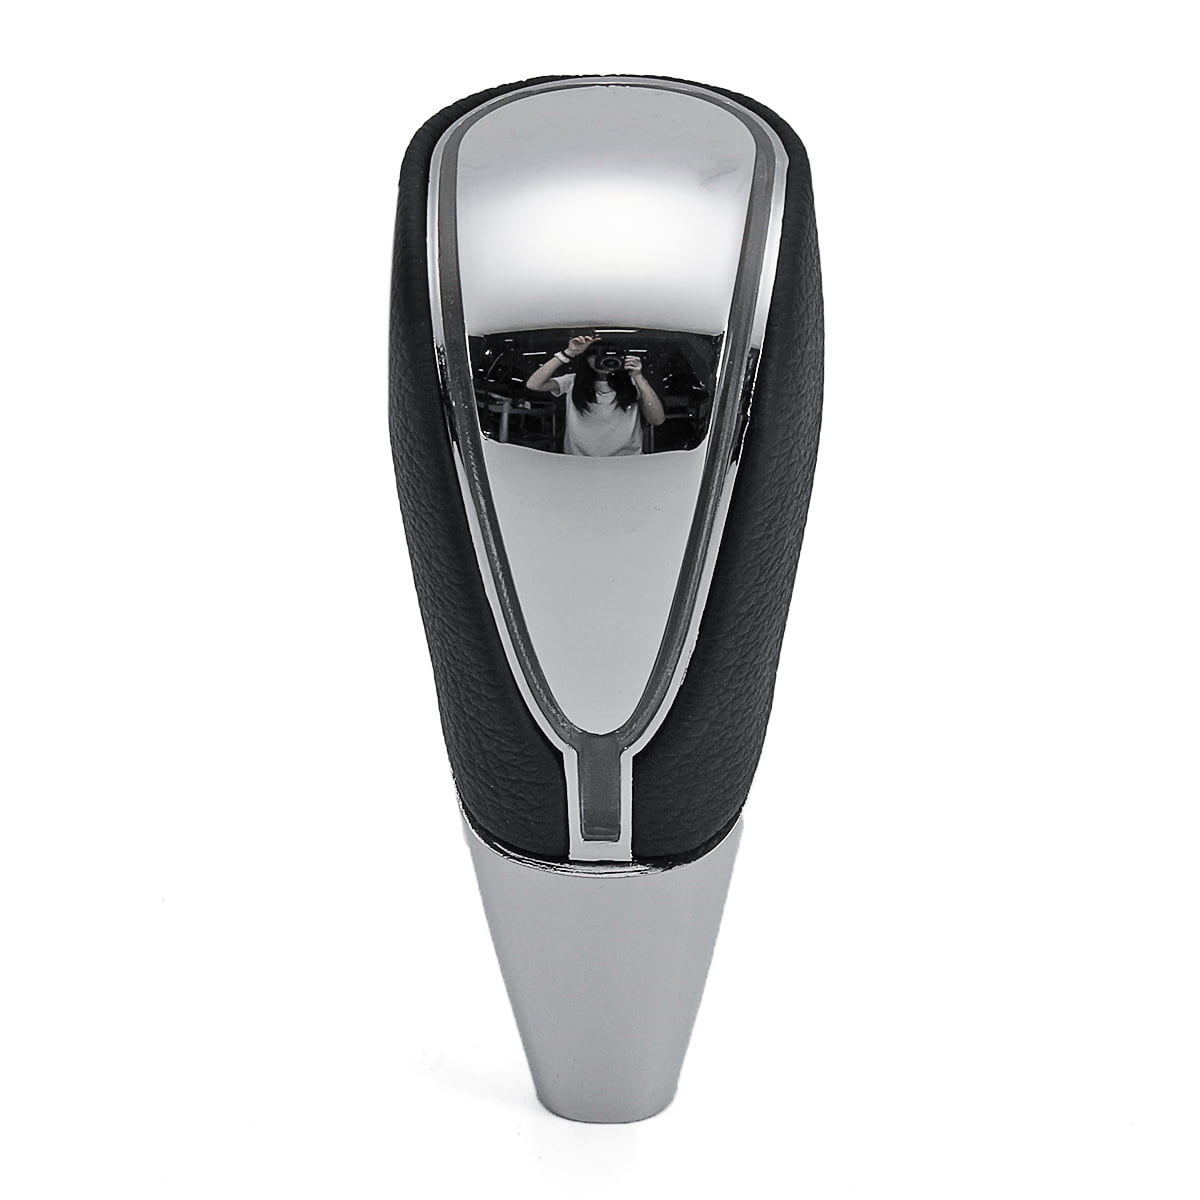 PRND Touch Activated Auto Car USB Crystal Gear Shift Knob With LED Light